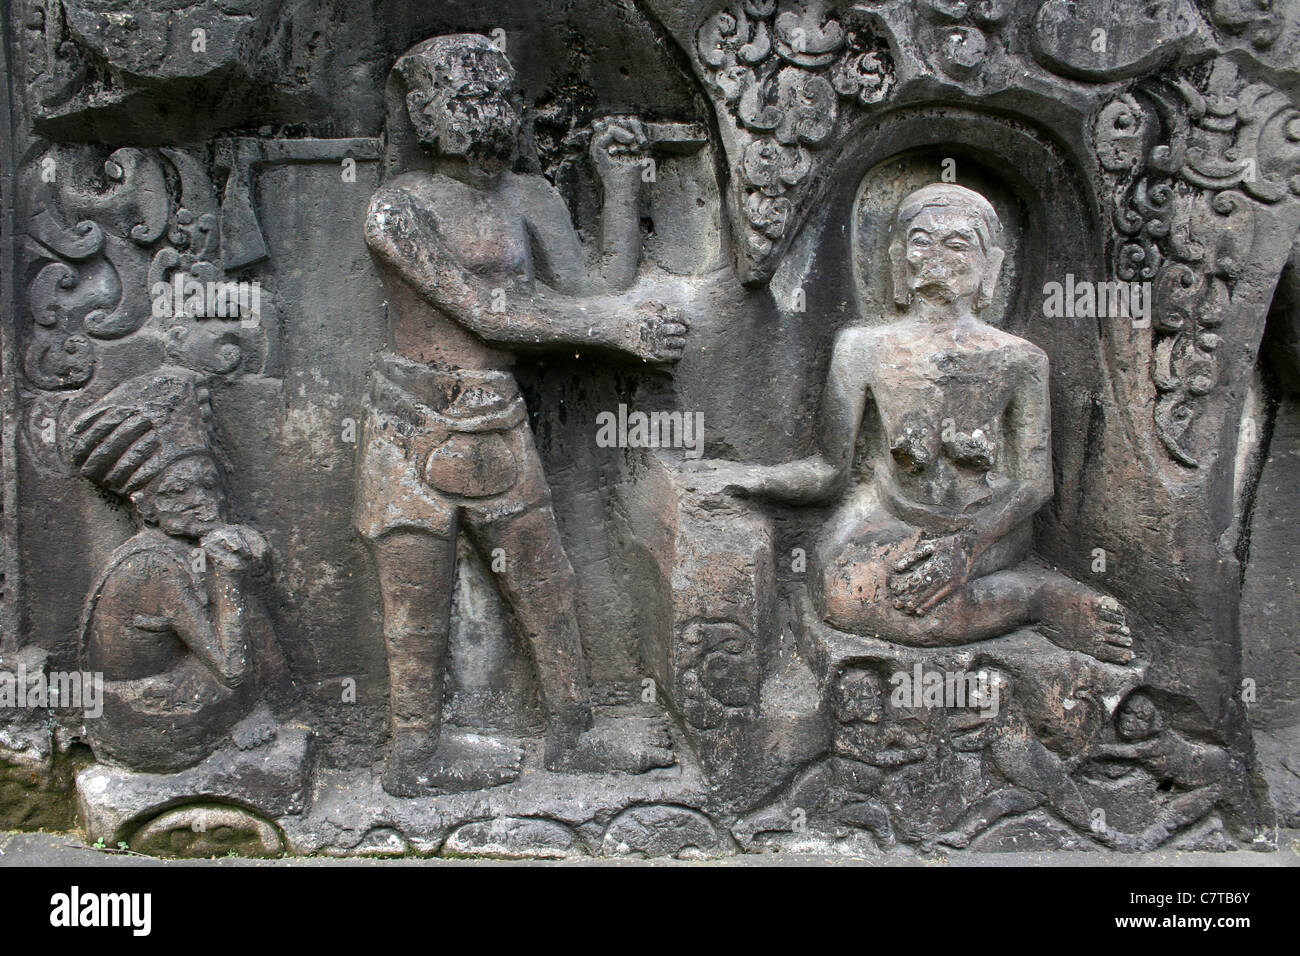 Carved Rock Art Relief at Yeh Pulu, Bali Stock Photo